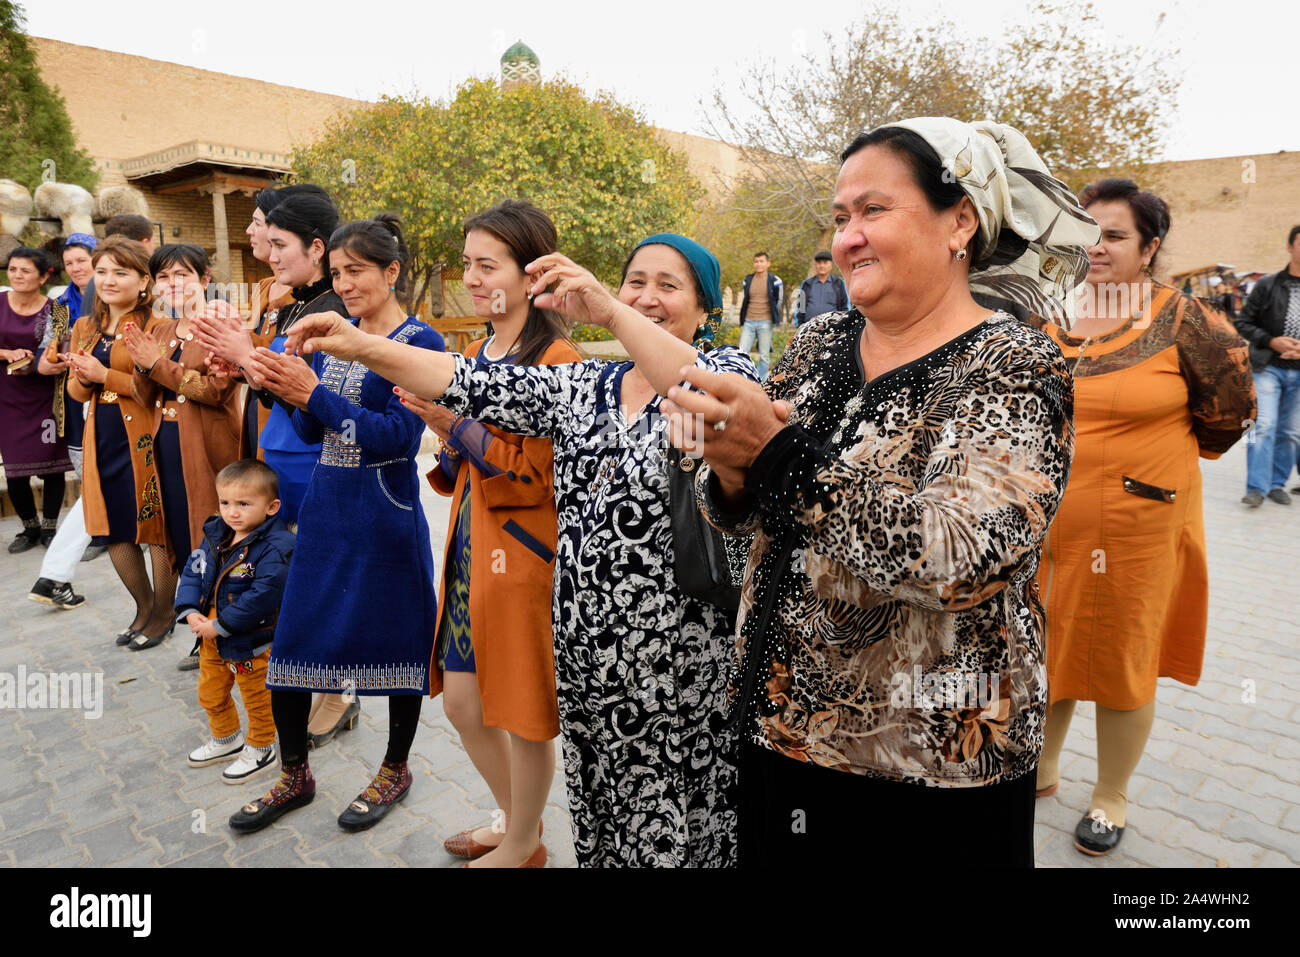 Dancing guests during a wedding in the main street of the old town of Khiva, a very popular site for all the festivities in the town. Uzbekistan Stock Photo